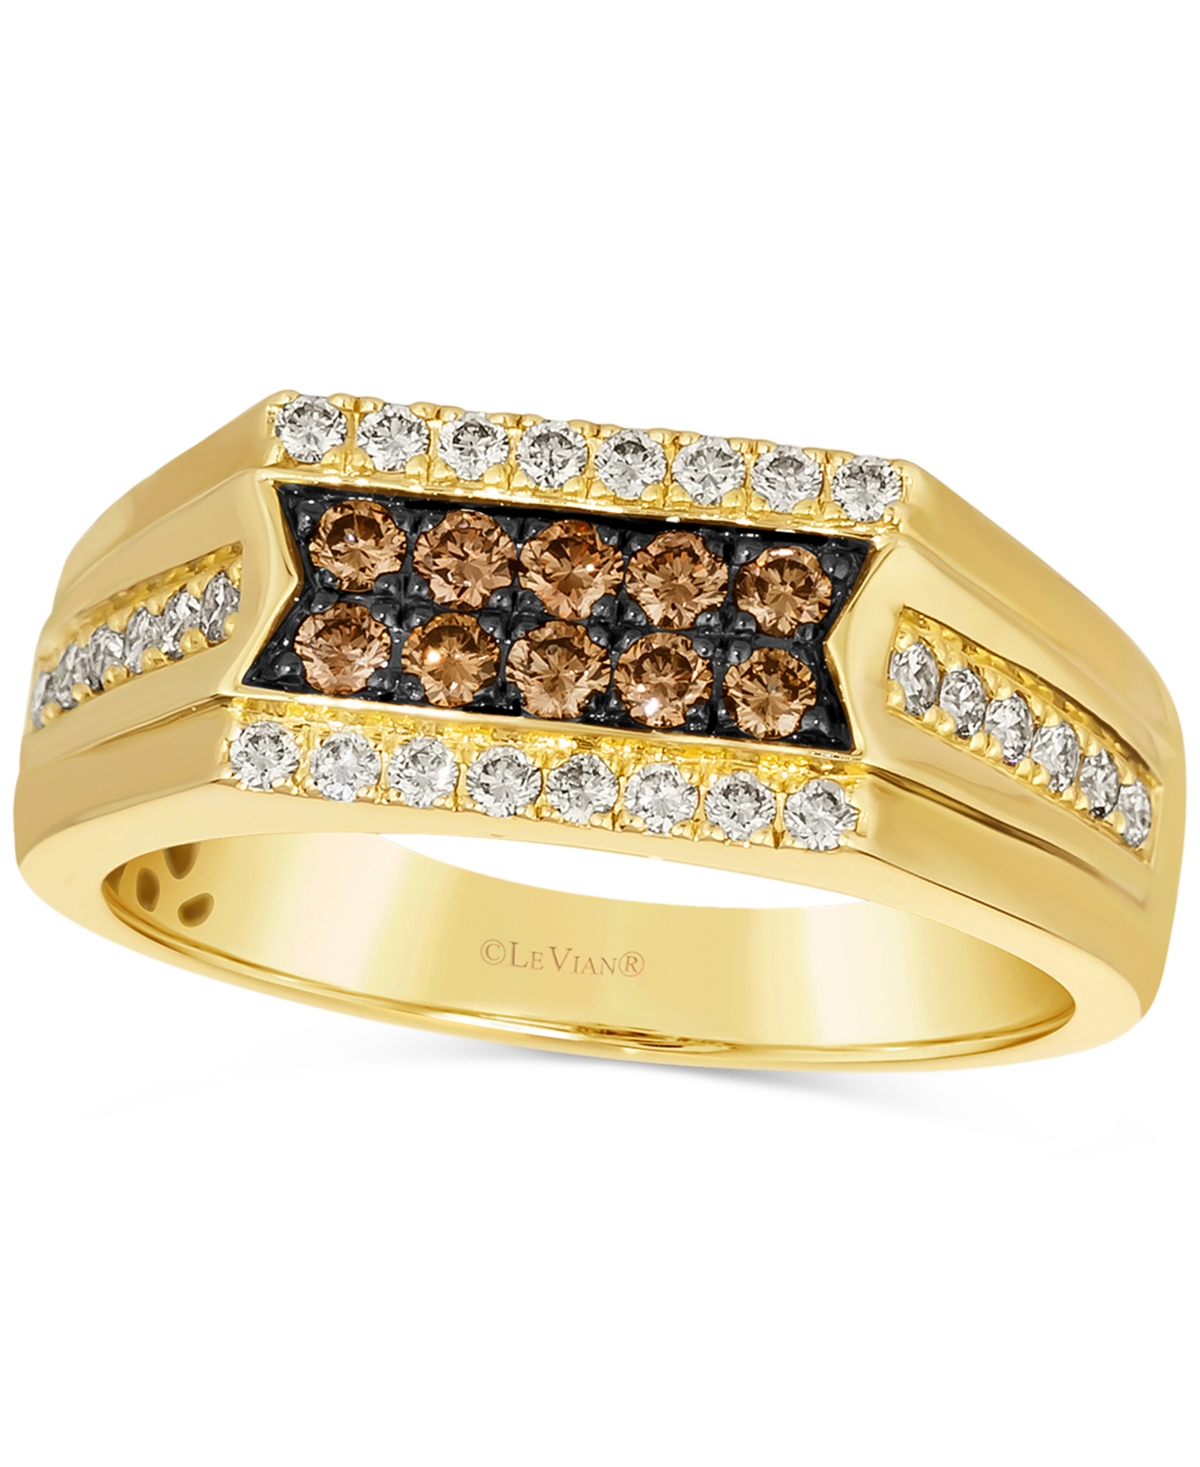 Le Vian Men's Chocolate Diamond (1/3 Ct. T.w.) & Nude Diamond (3/8 Ct. T.w.) Cluster Ring In 14k Gold In Yellow Gold